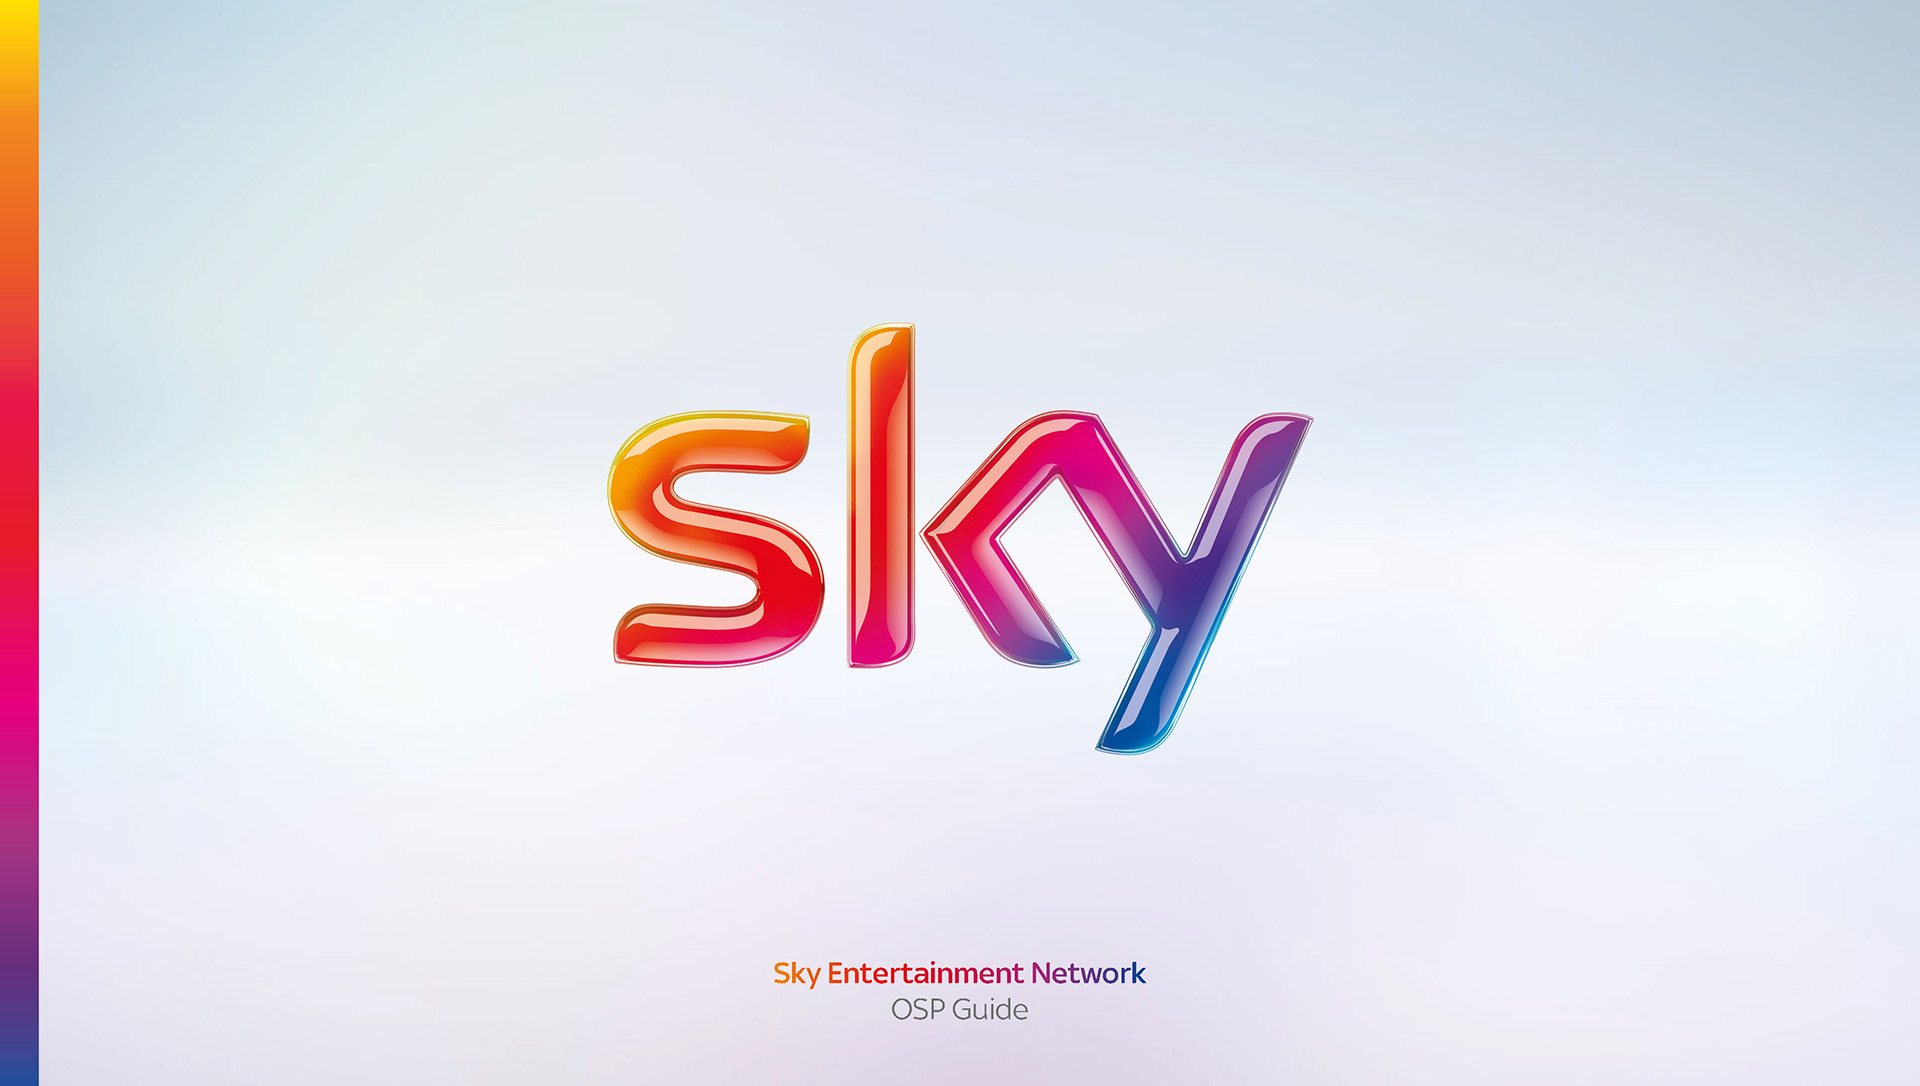 Sky_Ents_Network_OSP_Guide_29_04_2016_Page_001.jpg